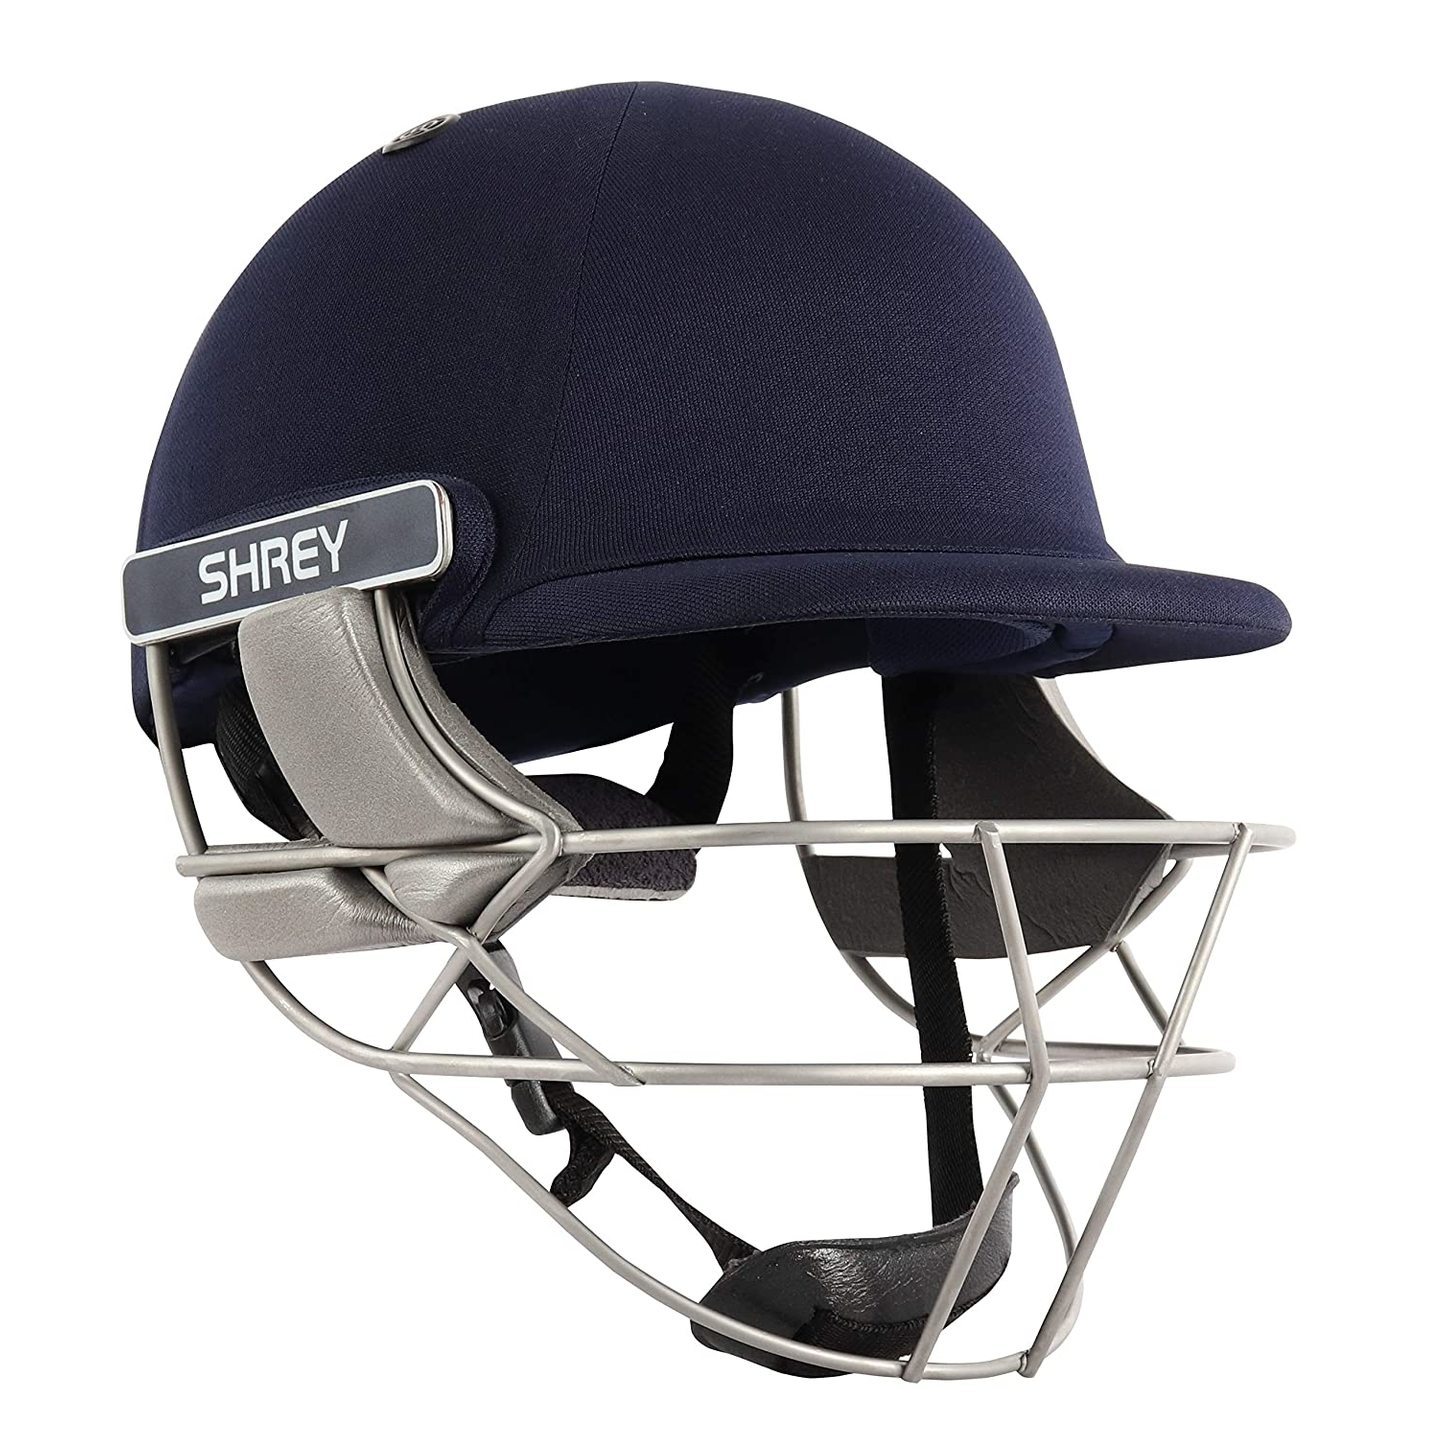 Shrey Pro Guard Air with STAINLESS STEEL VISOR  H112